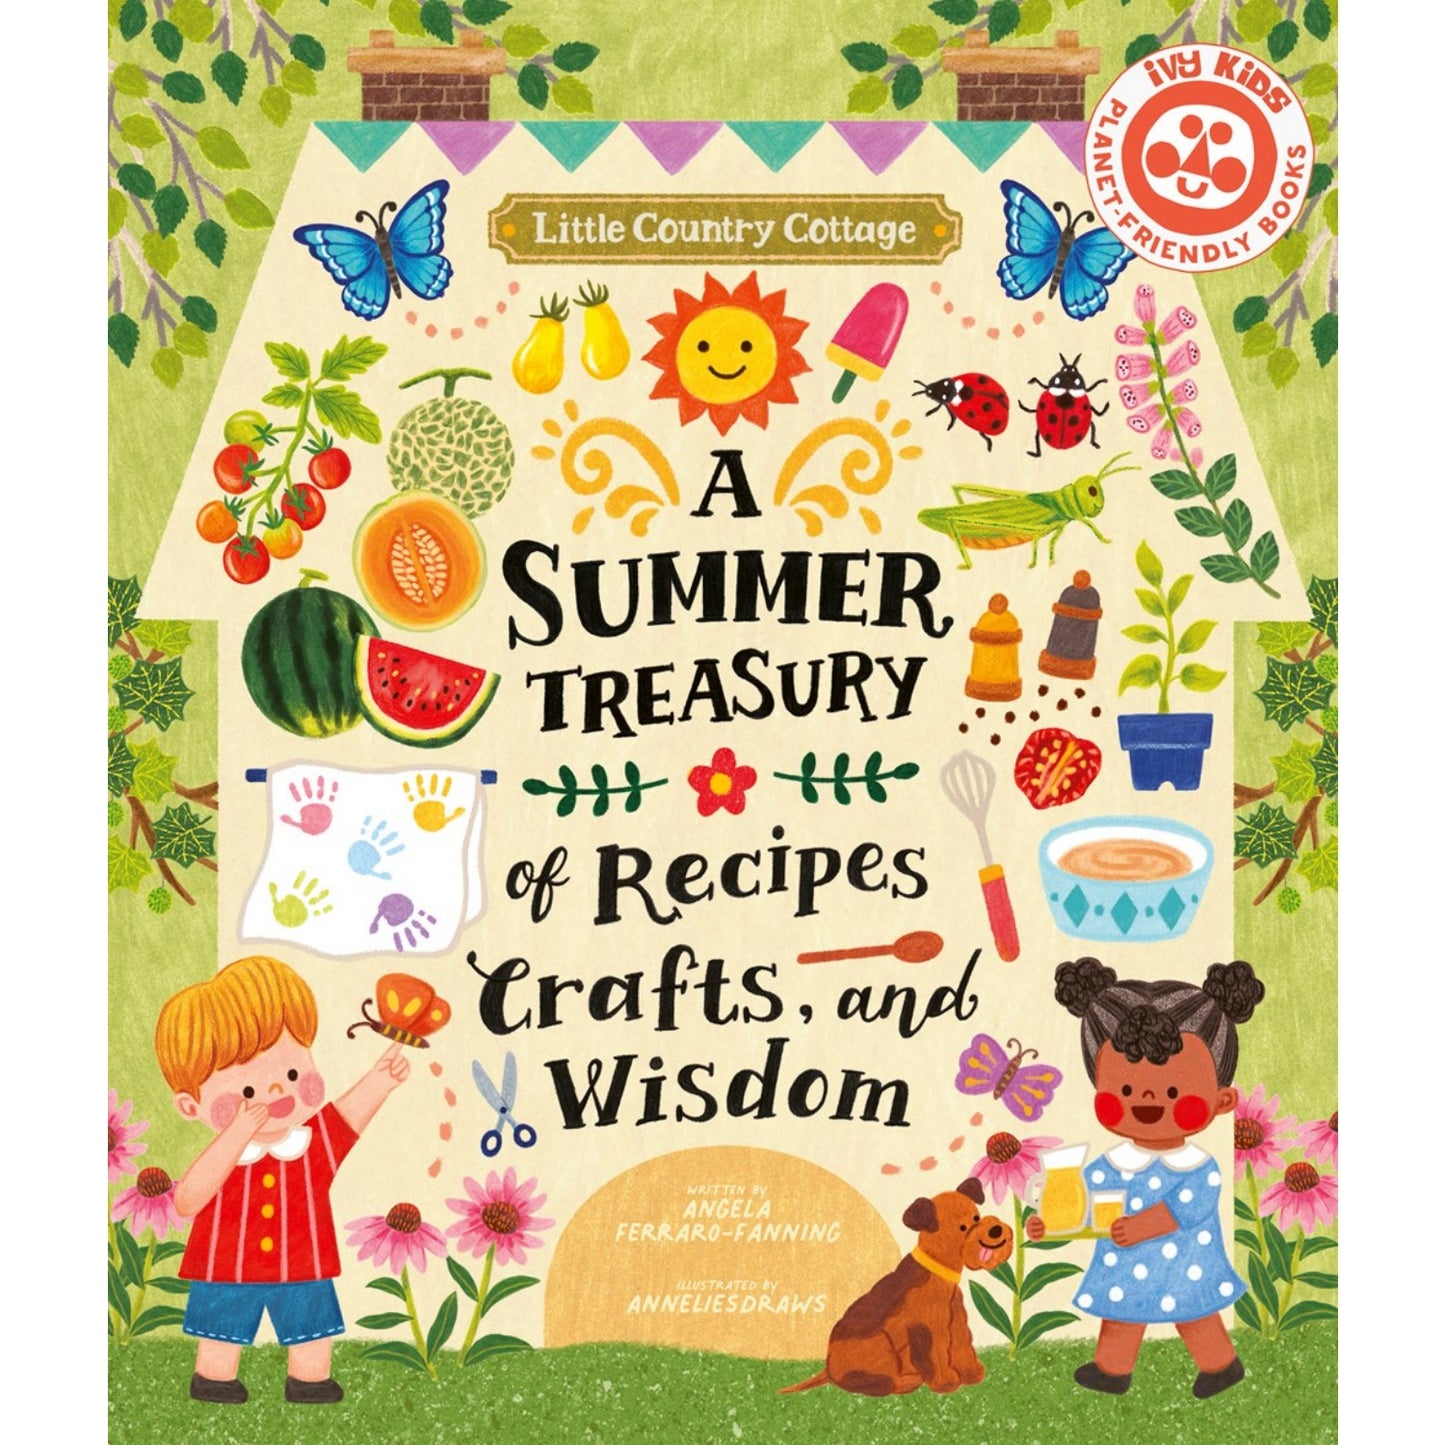 Little Country Cottage: A Summer Treasury of Recipes, Crafts and Wisdom | Children’s Book on Nature